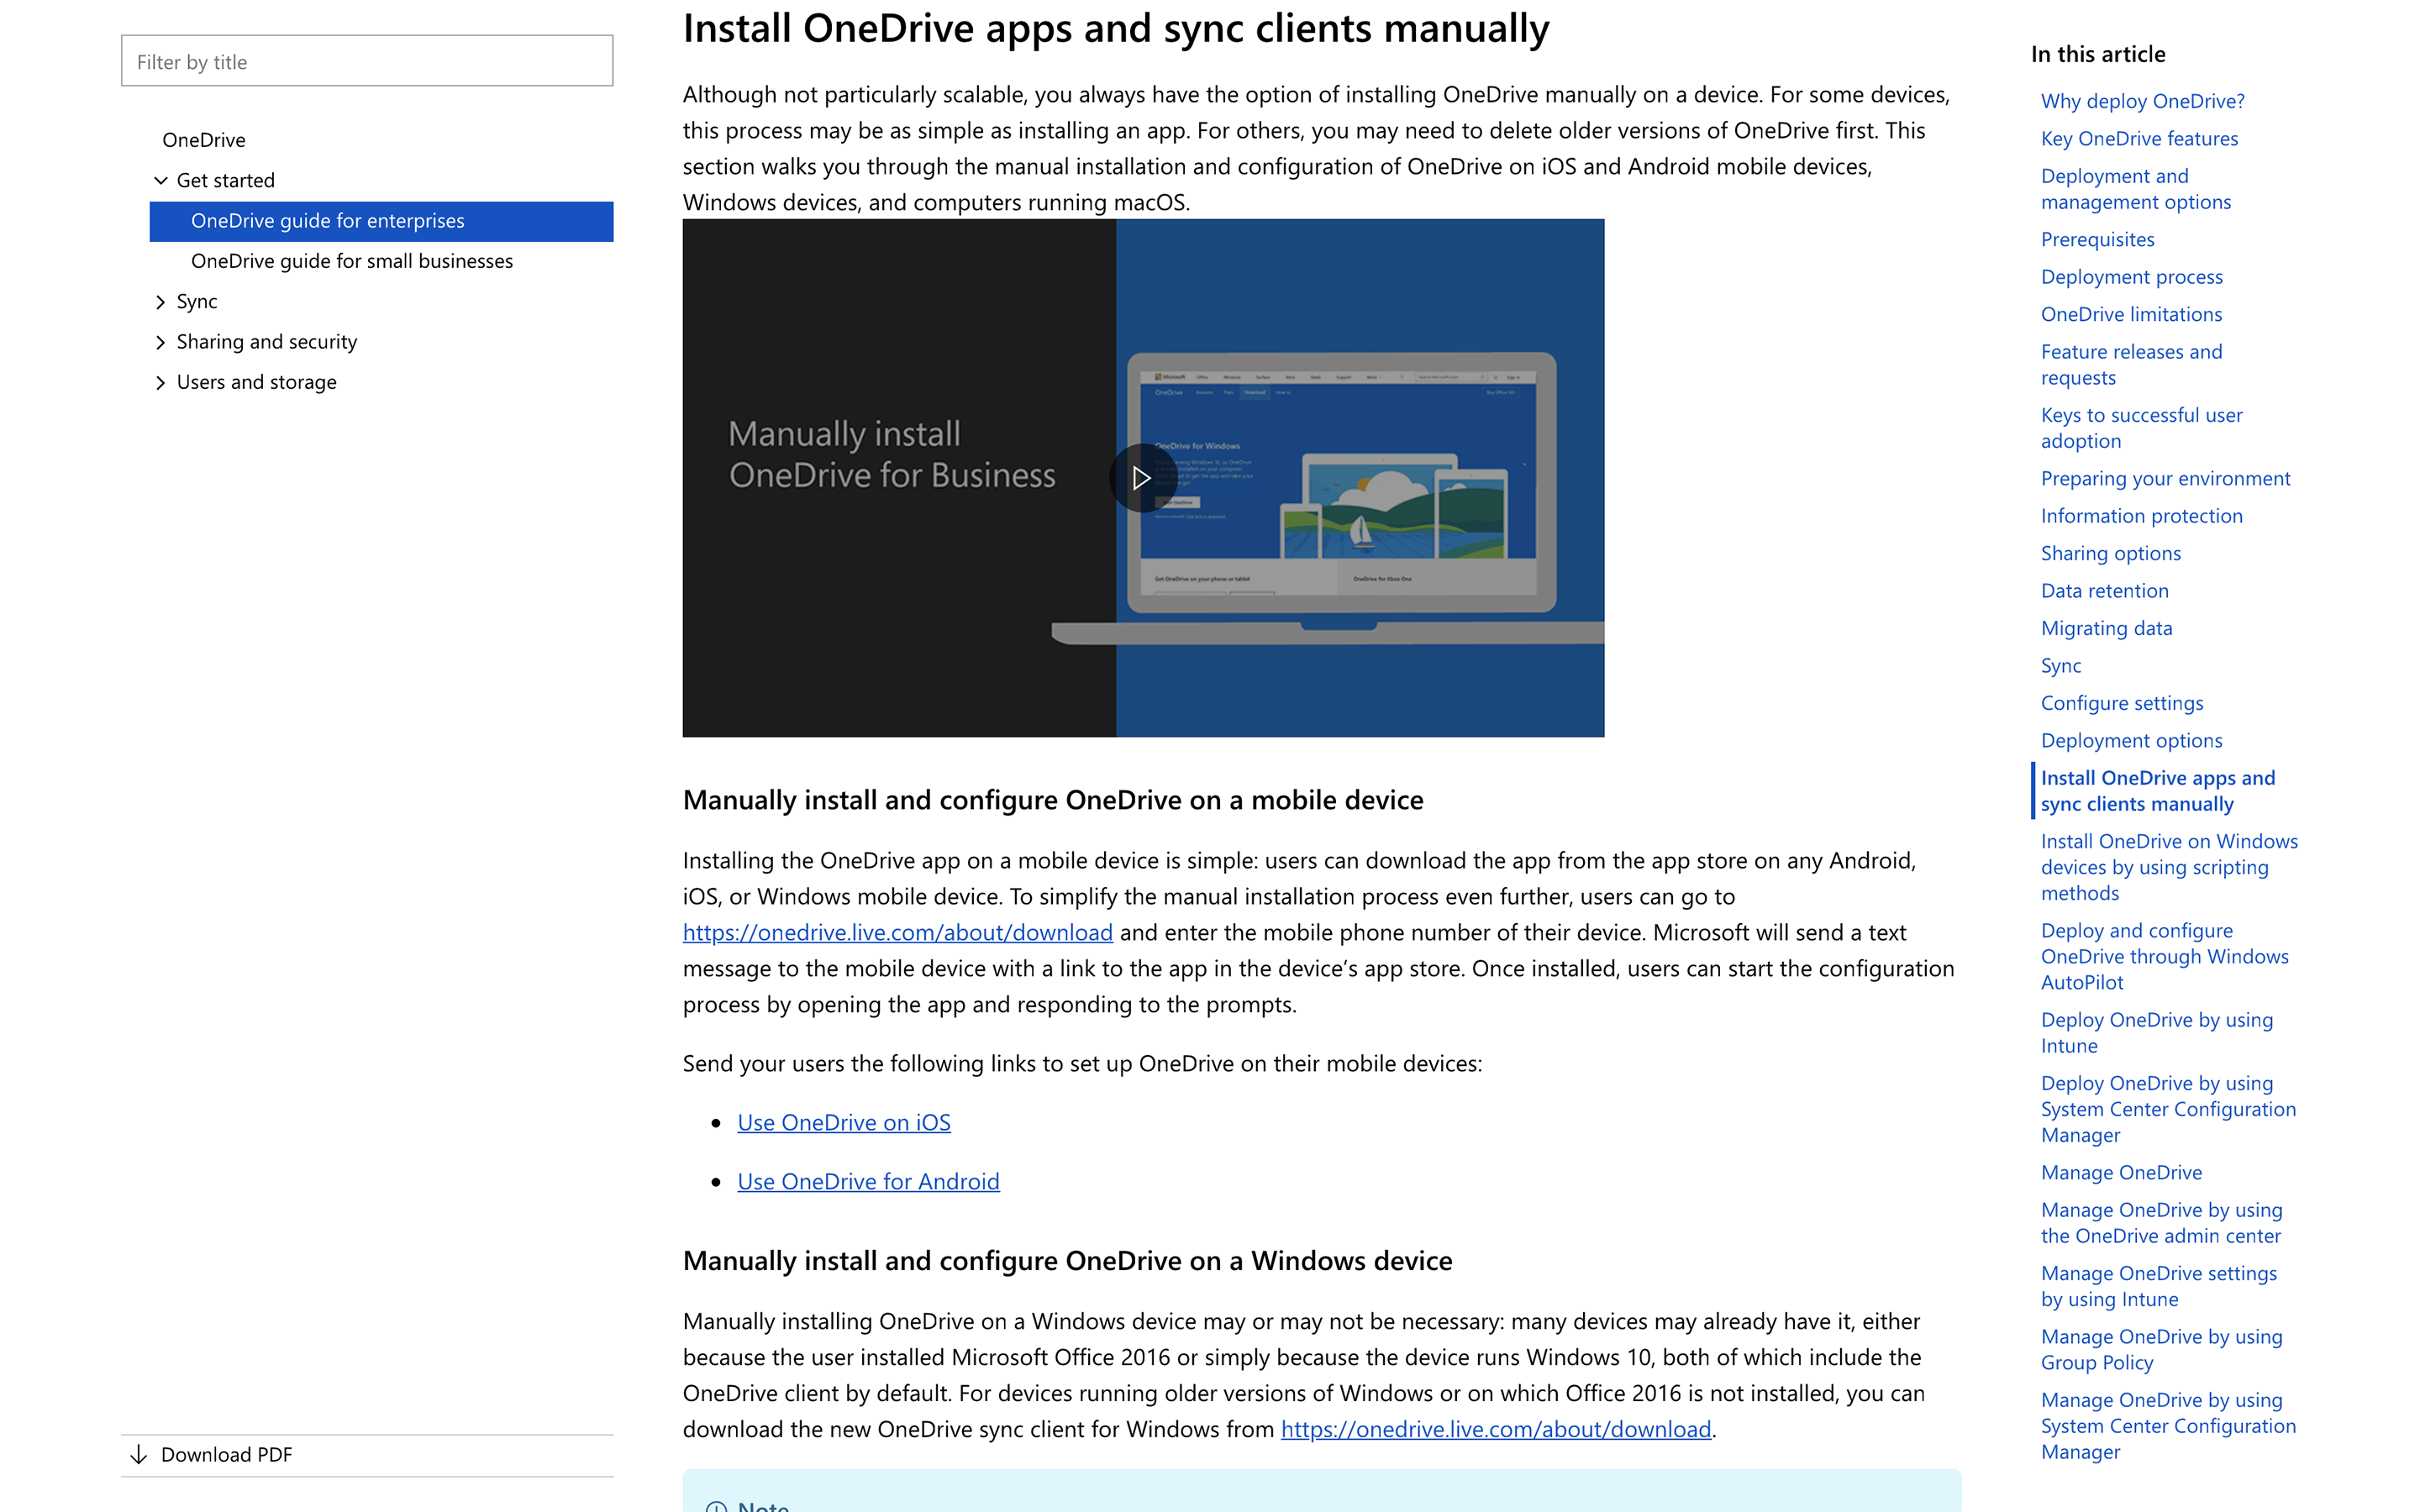 Screenshot of the “Install OneDrive apps and sync clients manually” section